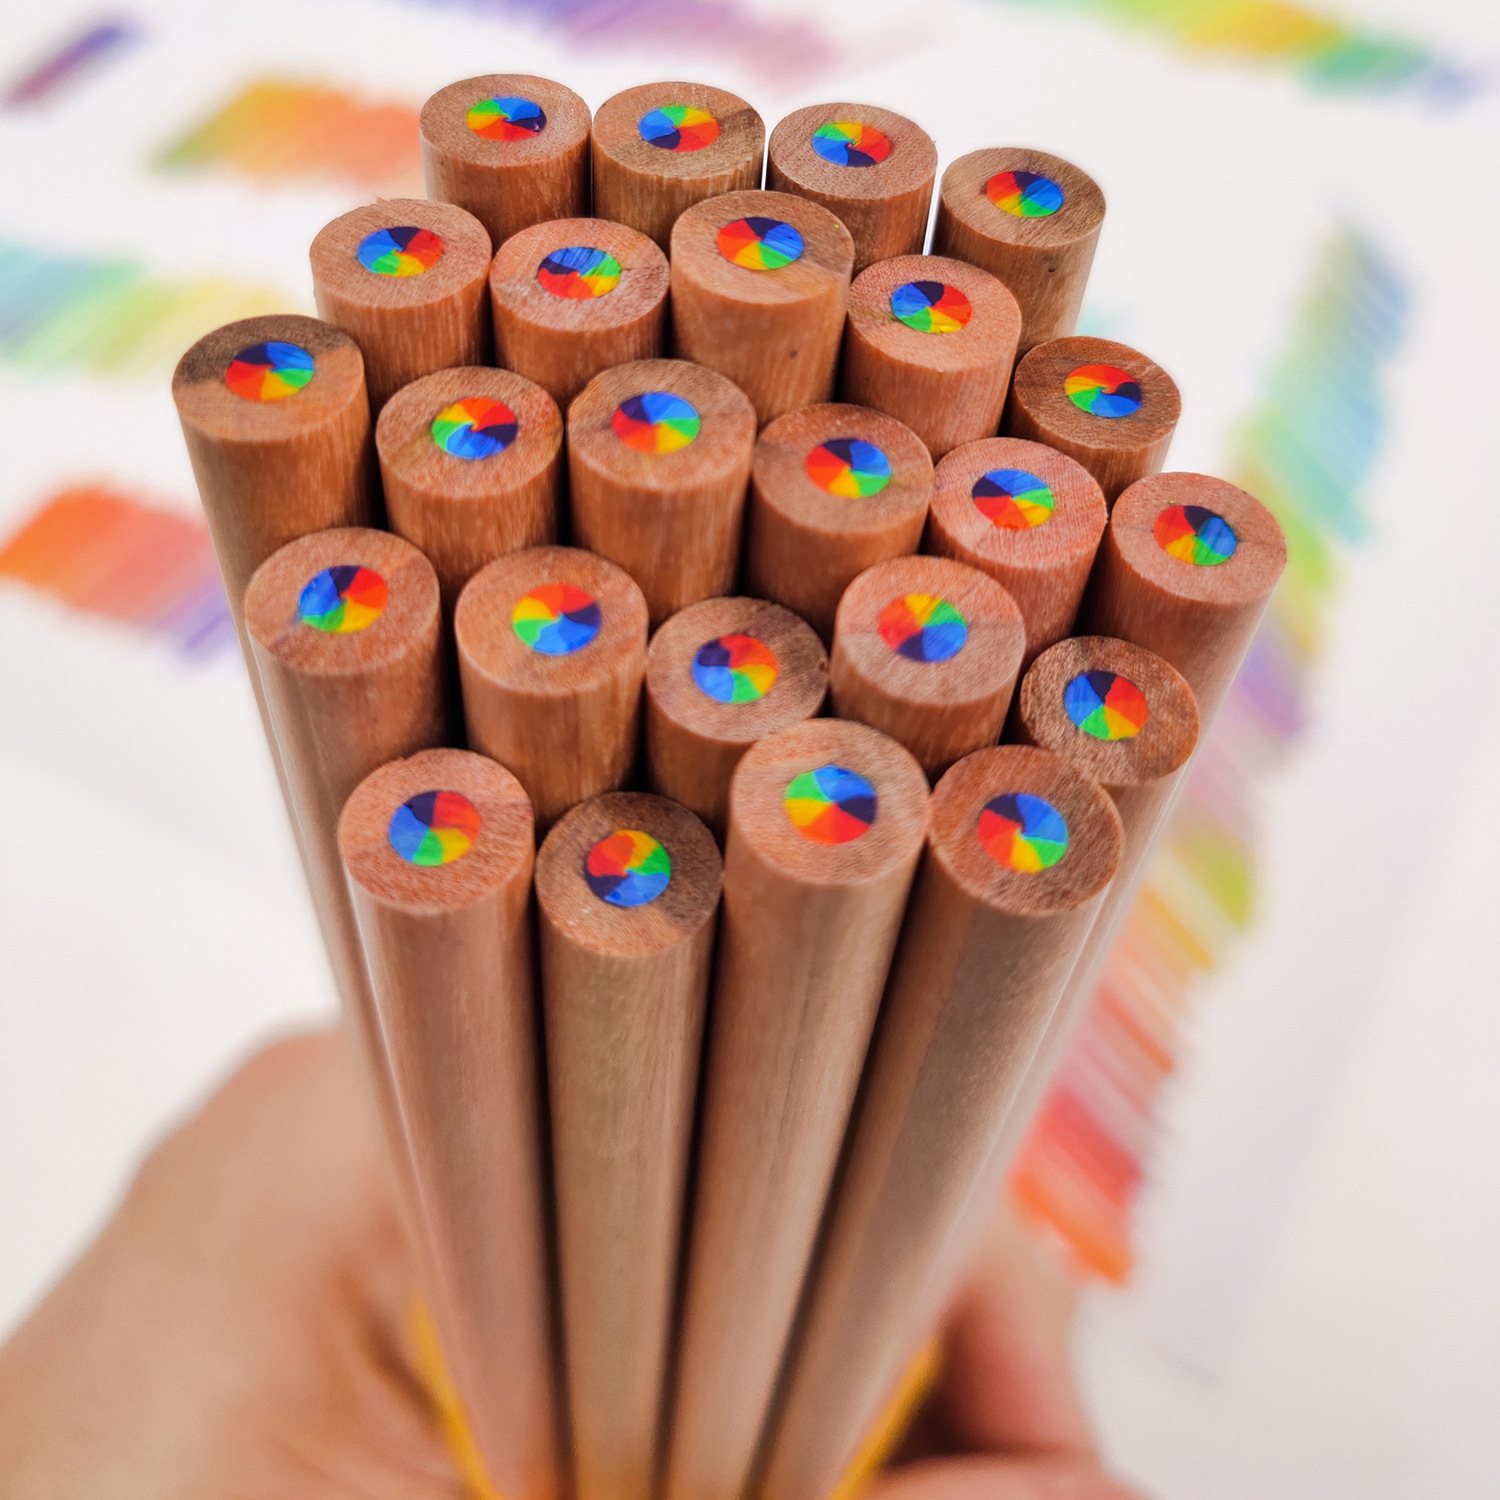  ThEast 7 Color in 1 Rainbow Pencils for Kids, 10 Pieces  Rainbow Colored Pencils, Assorted Colors for Drawing Coloring Sketching  Pencils For Drawing Stationery, Bulk, Pre-sharpened (10) : Office Products